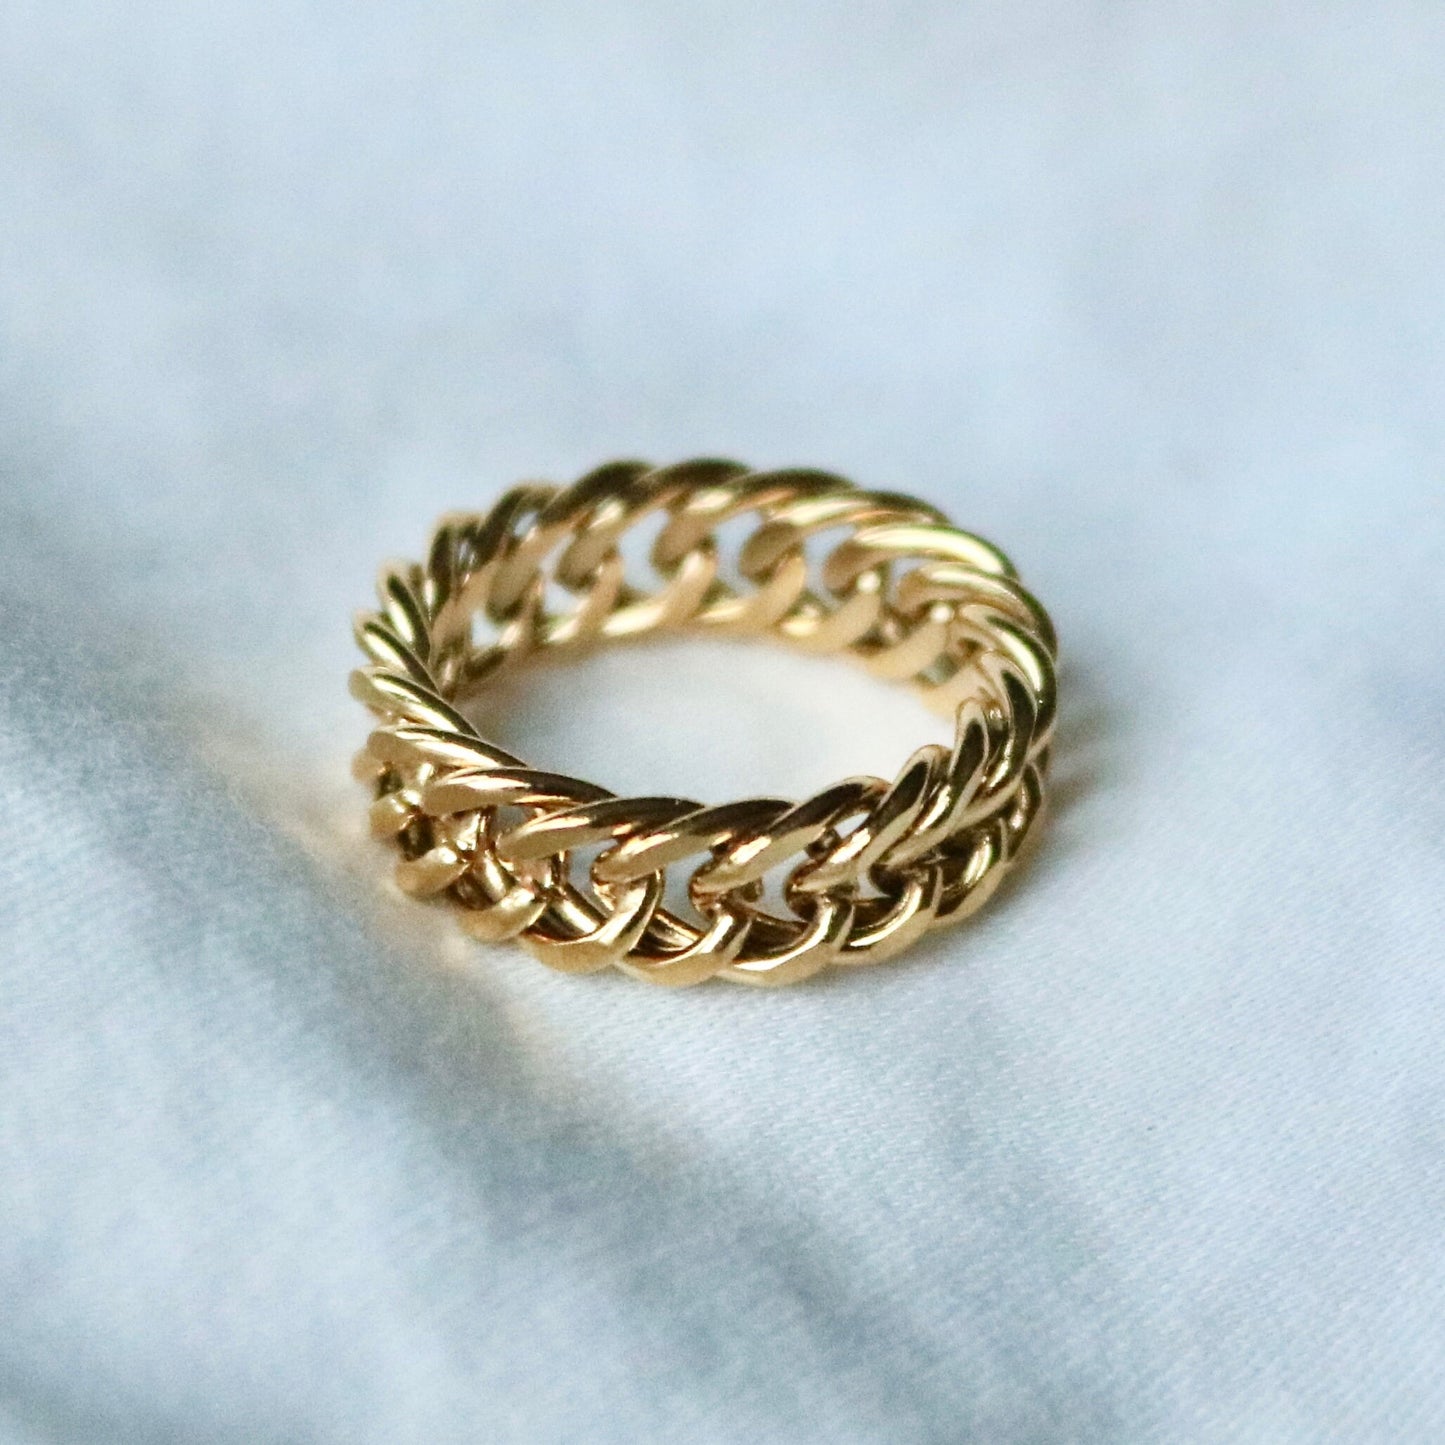 Braided gold ring - gold twisted ring, braided ring, stackable ring, unique ring, statement ring, gold loop ring, braided gold band, woven